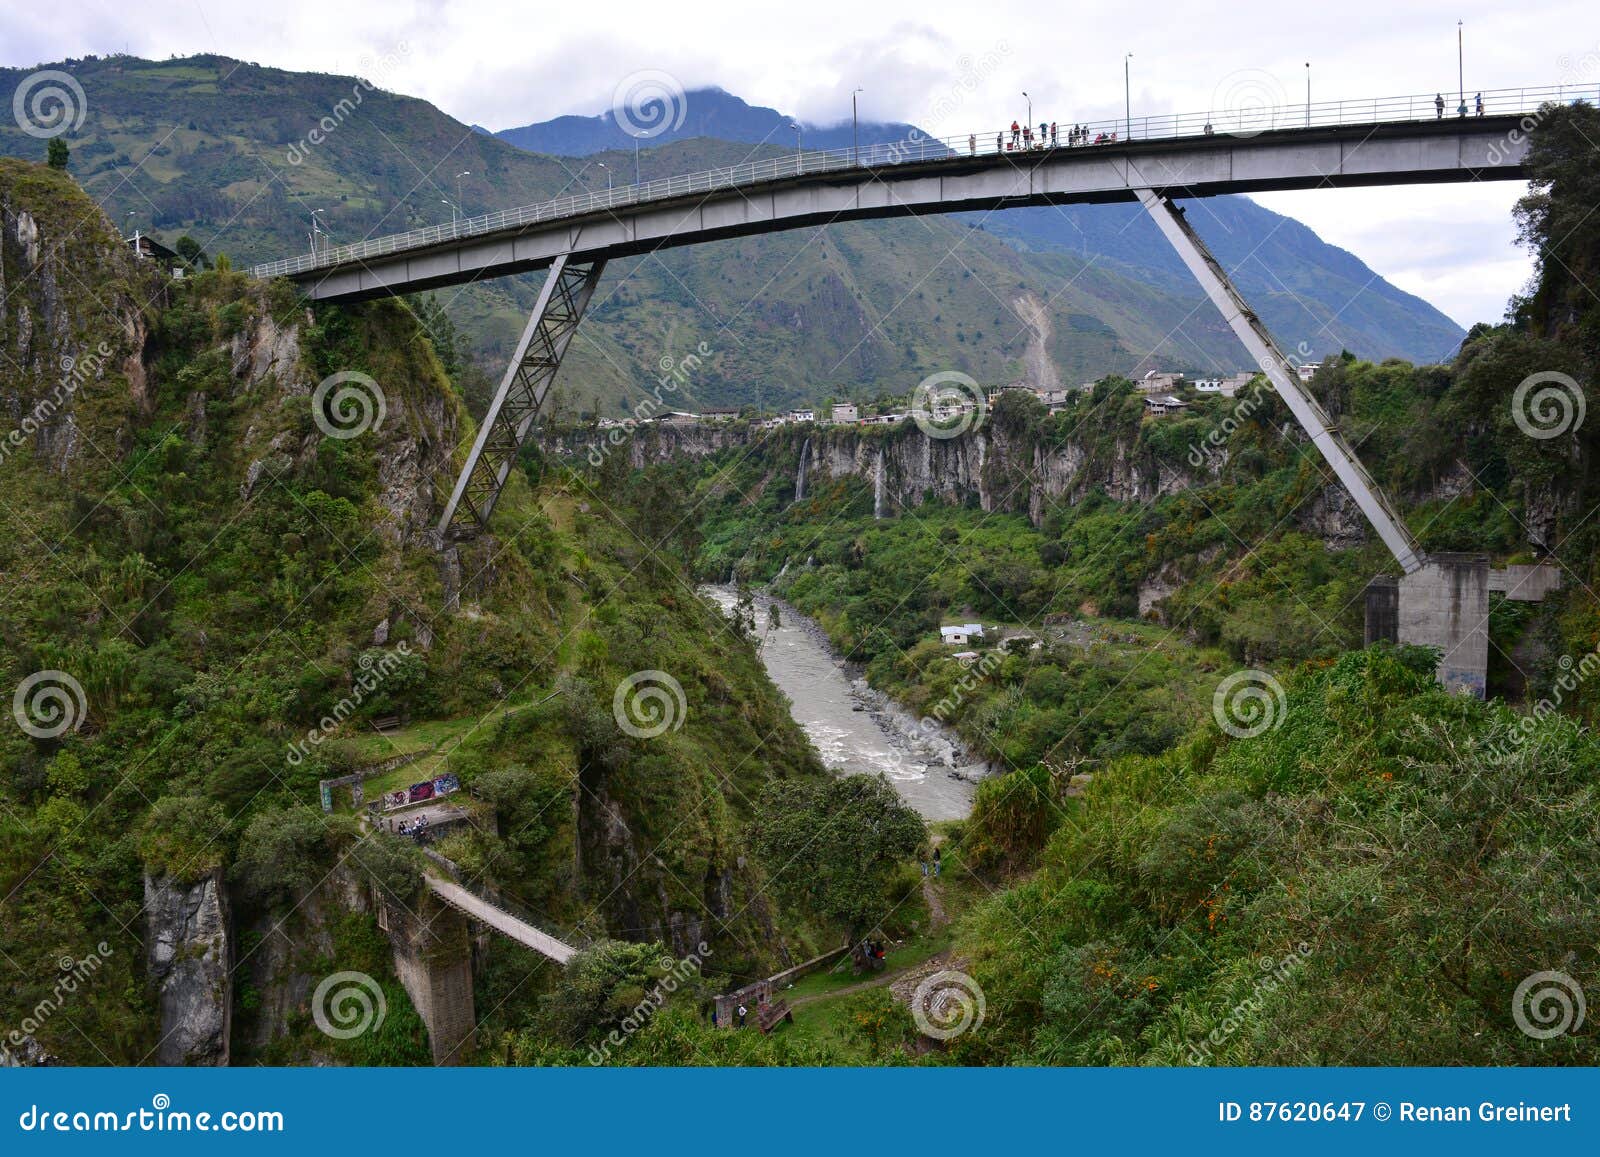 tourist jumping from a bridge in baÃÂ±os, ecuador